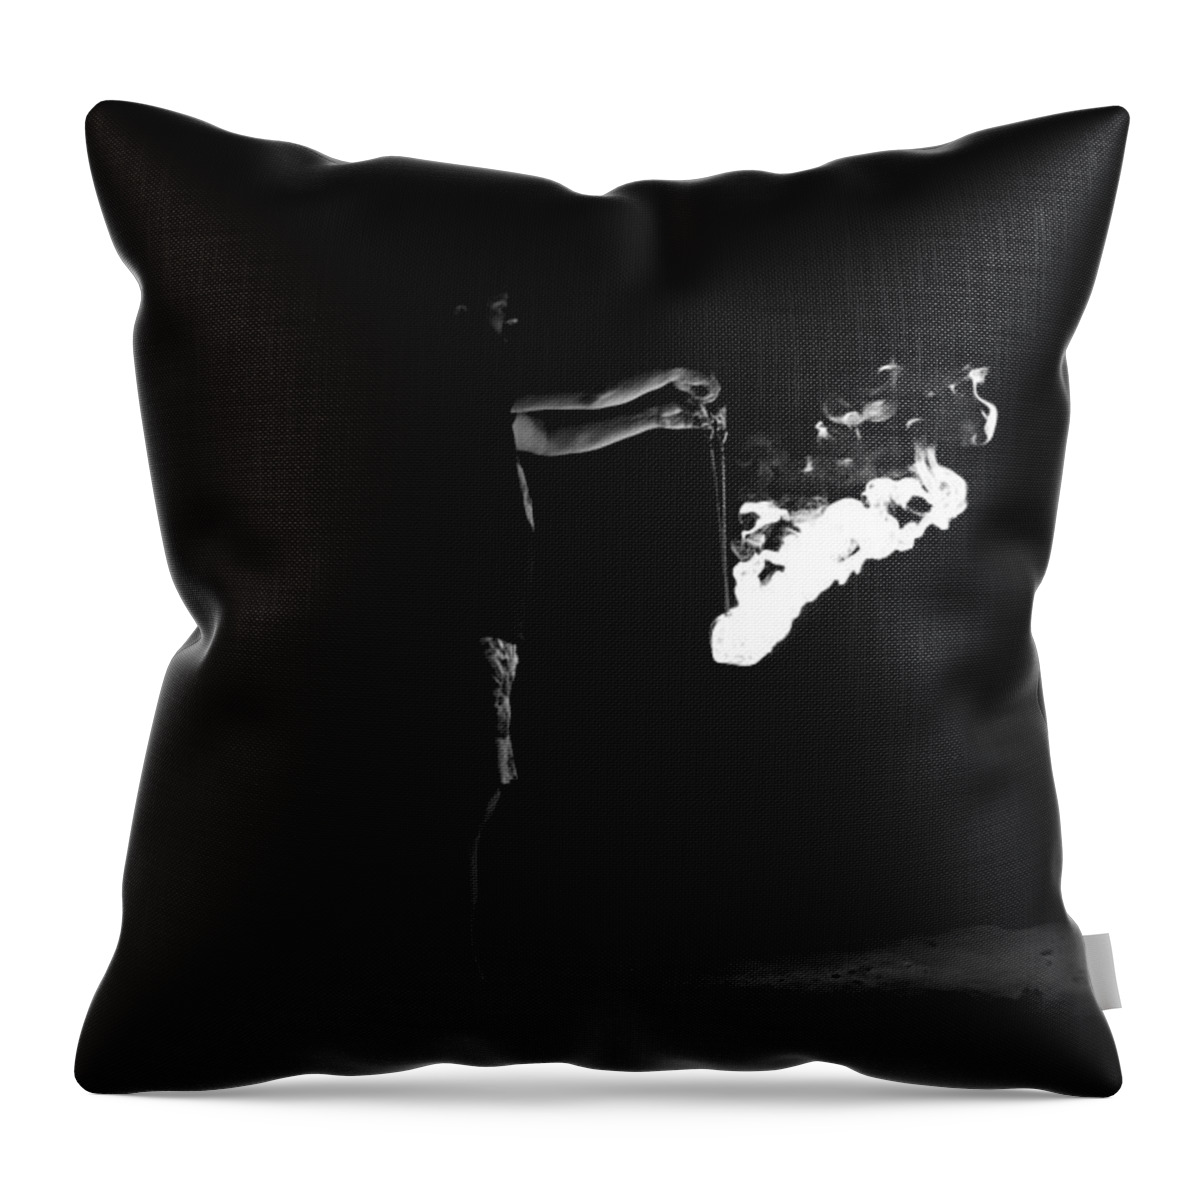 T50yp Throw Pillow featuring the photograph Fire Poi by Nicholas Miller